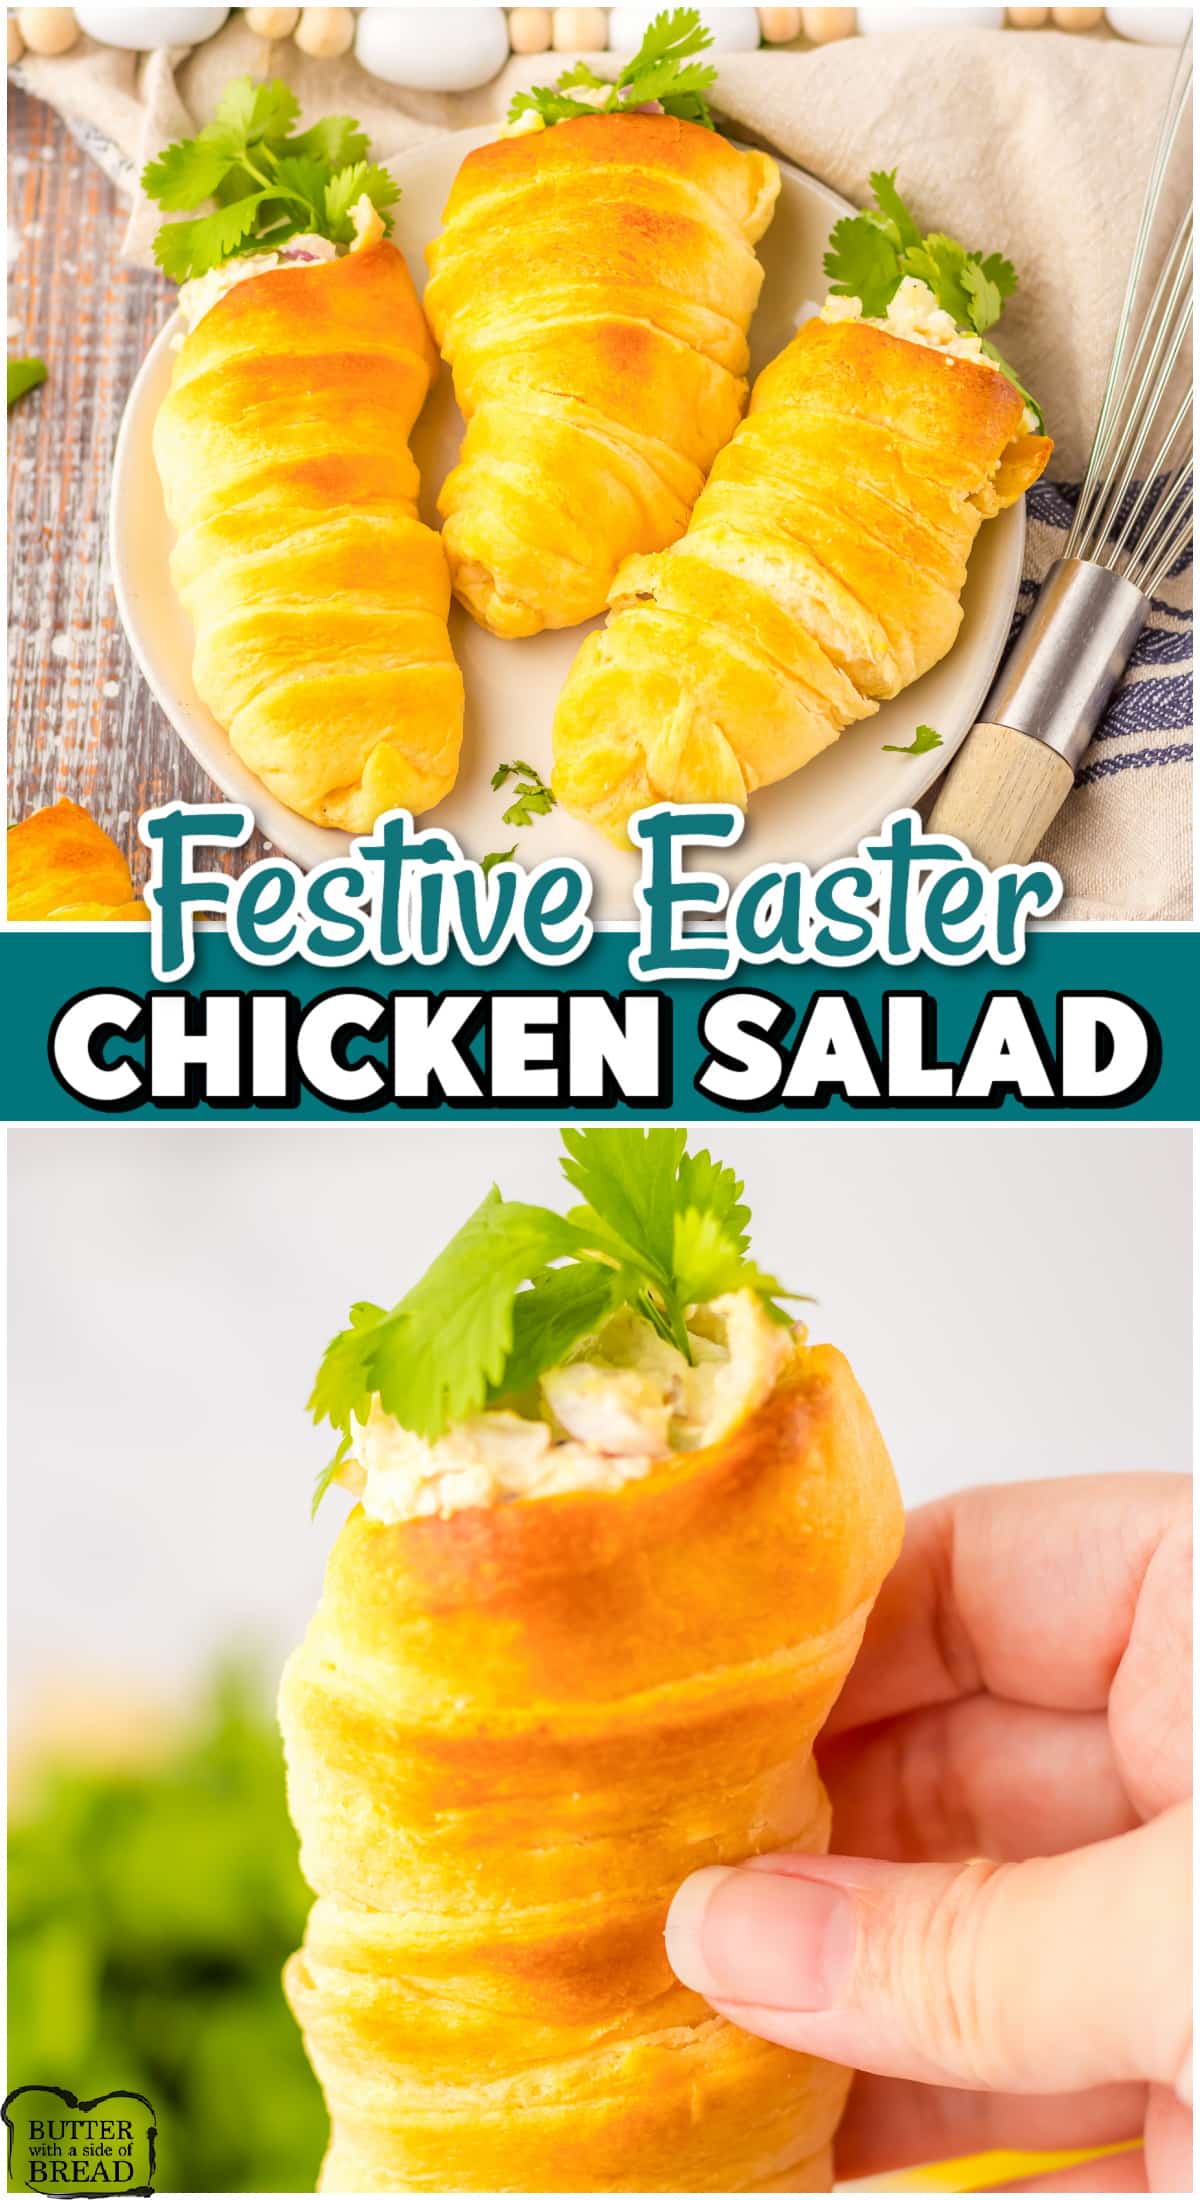 Chicken Salad Crescents in the shape of a carrot are perfect for Easter! Simple, flavorful chicken salad stuffed into baked crescent rolls that use parsley to look like a carrot. These cute, festive sandwiches are great for any Spring get-together or event!